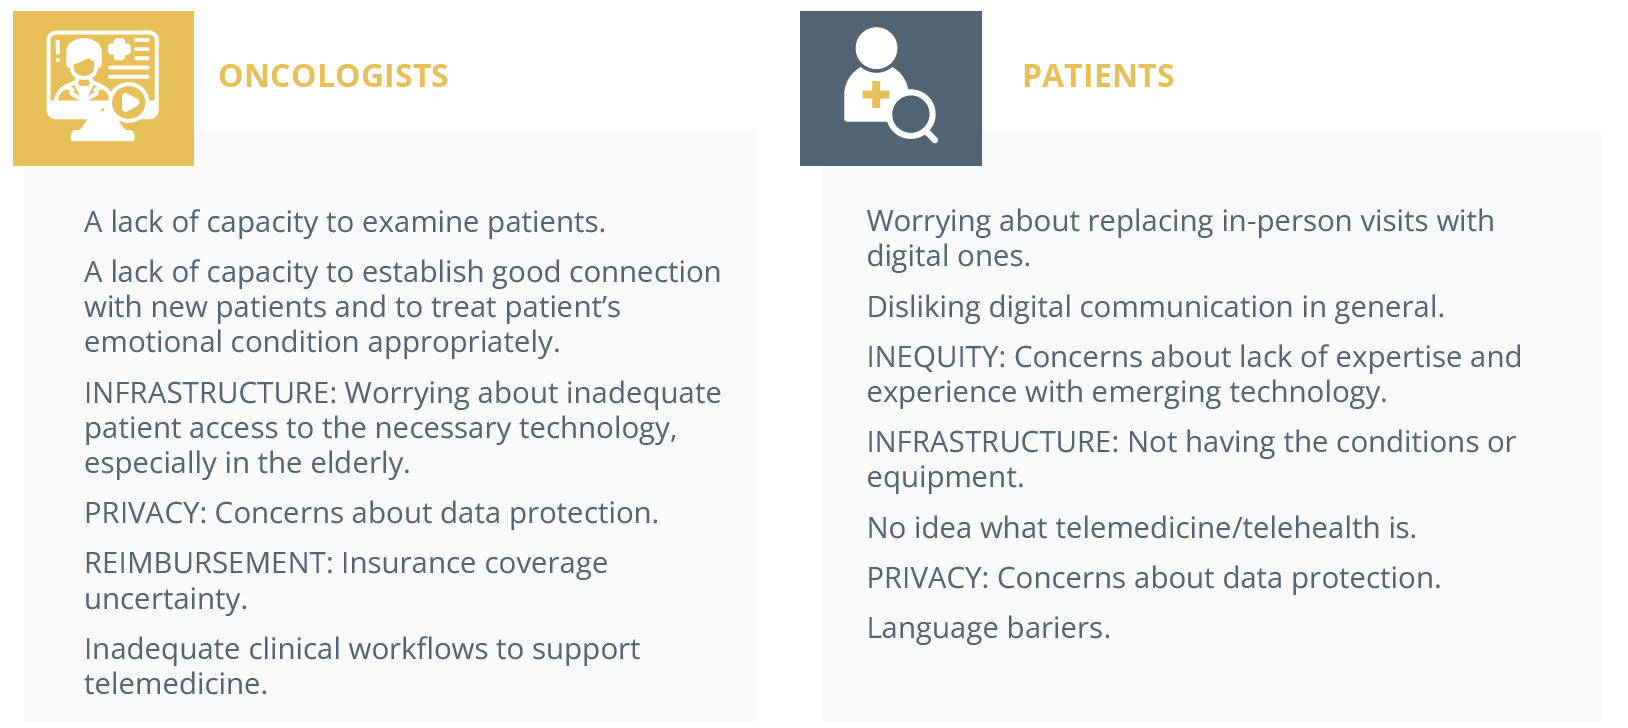 There are barriers to telehealth practices for oncologists and patients